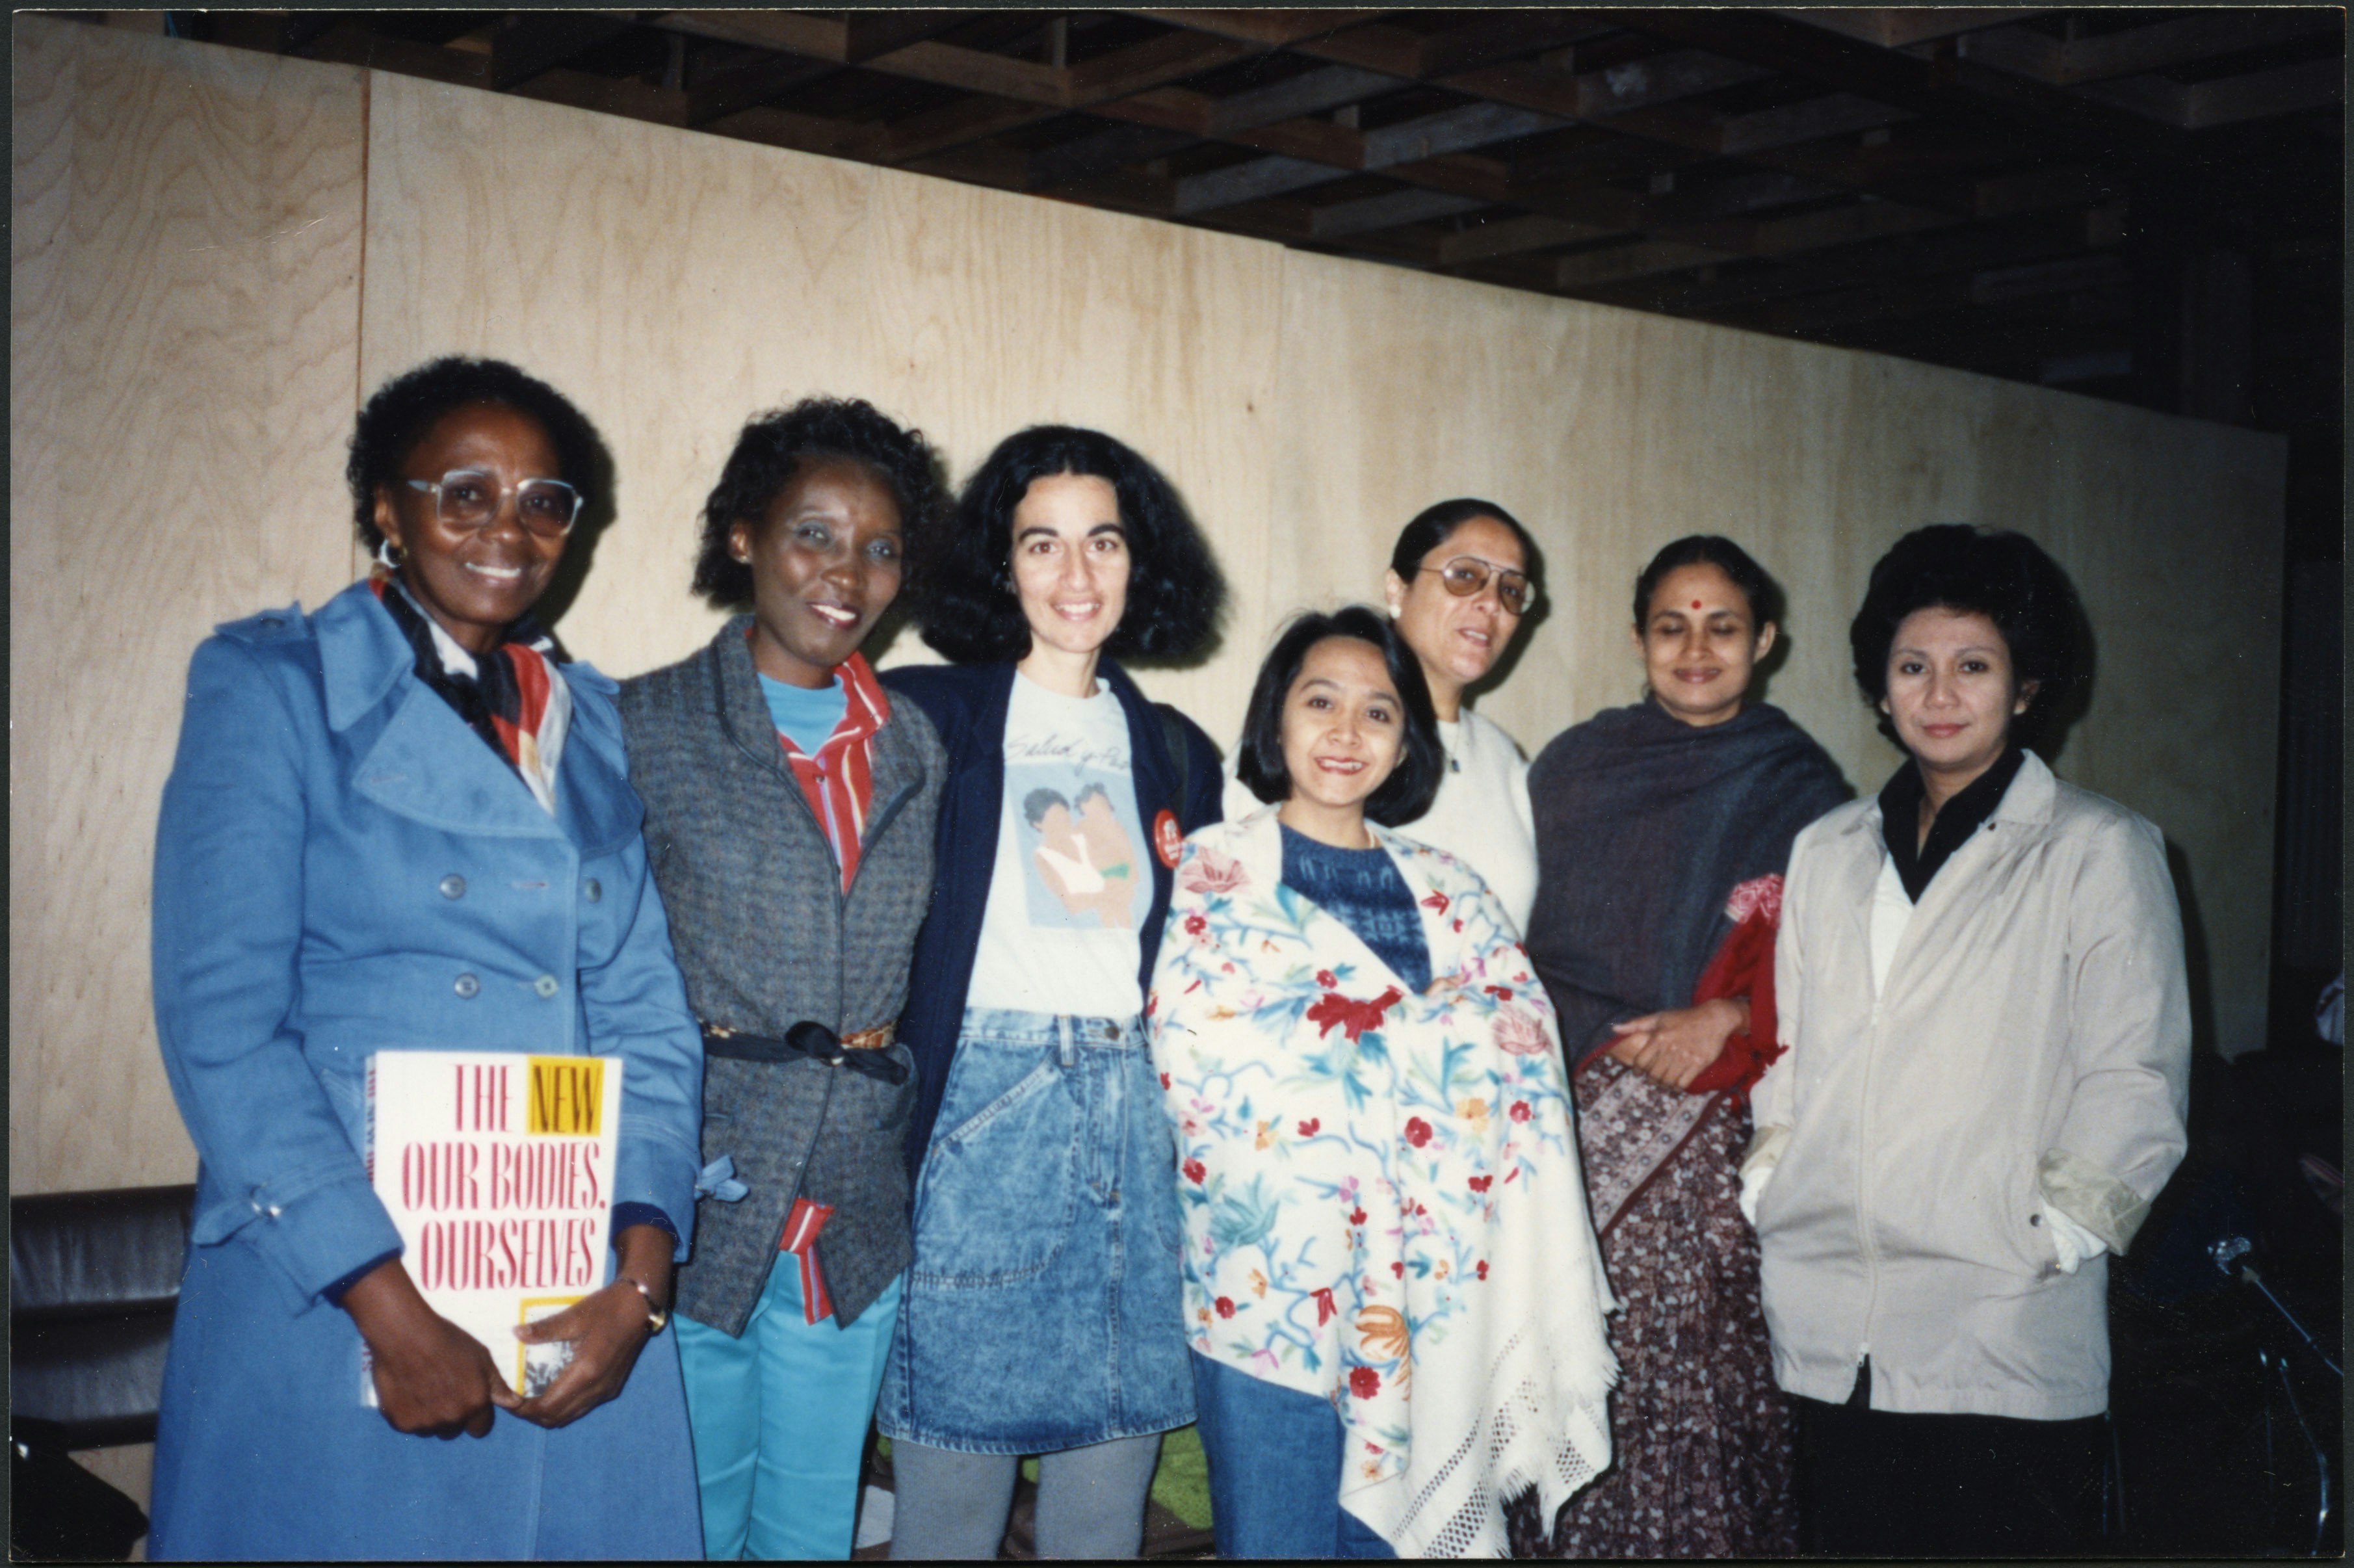 Group of women at International Women's Health Coalition (IWHC)/World Health Organization meeting, holding a copy of The New Our Bodies, Ourselves